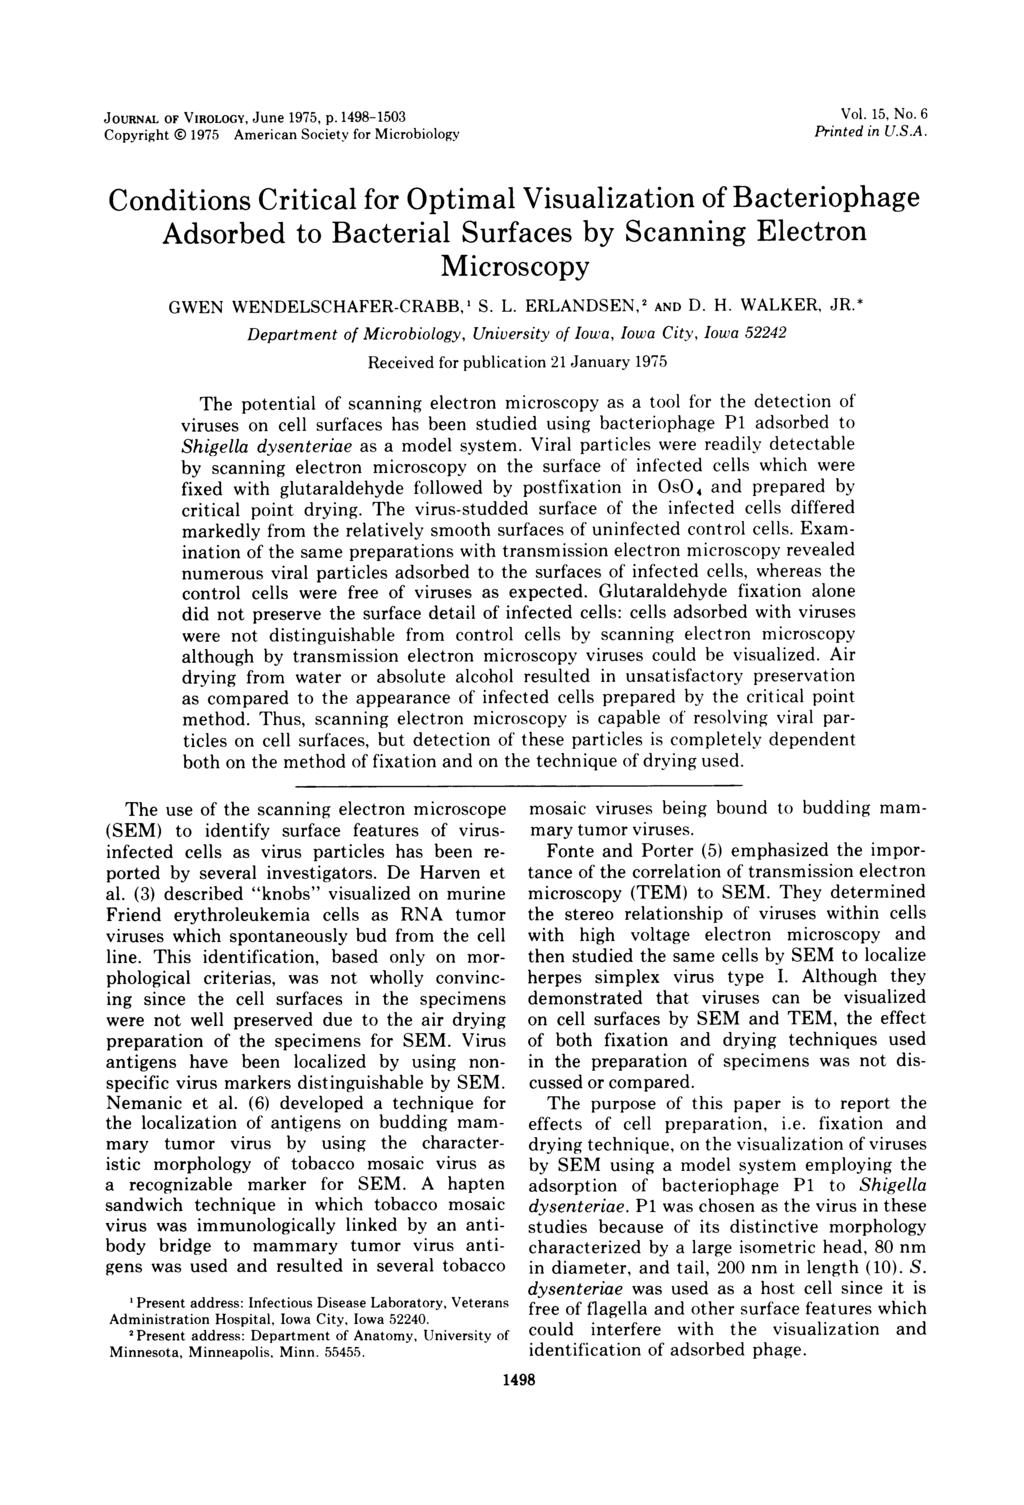 JOURNAL OF VIROLOGY, June 1975, p. 1498-1503 Copyright 0 1975 American Society for Microbiology Vol. 15, No. 6 Printed in U.S.A. Conditions Critical for Optimal Visualization of Bacteriophage Adsorbed to Bacterial Surfaces by Scanning Electron Microscopy GWEN WENDELSCHAFER-CRABB,1 S.